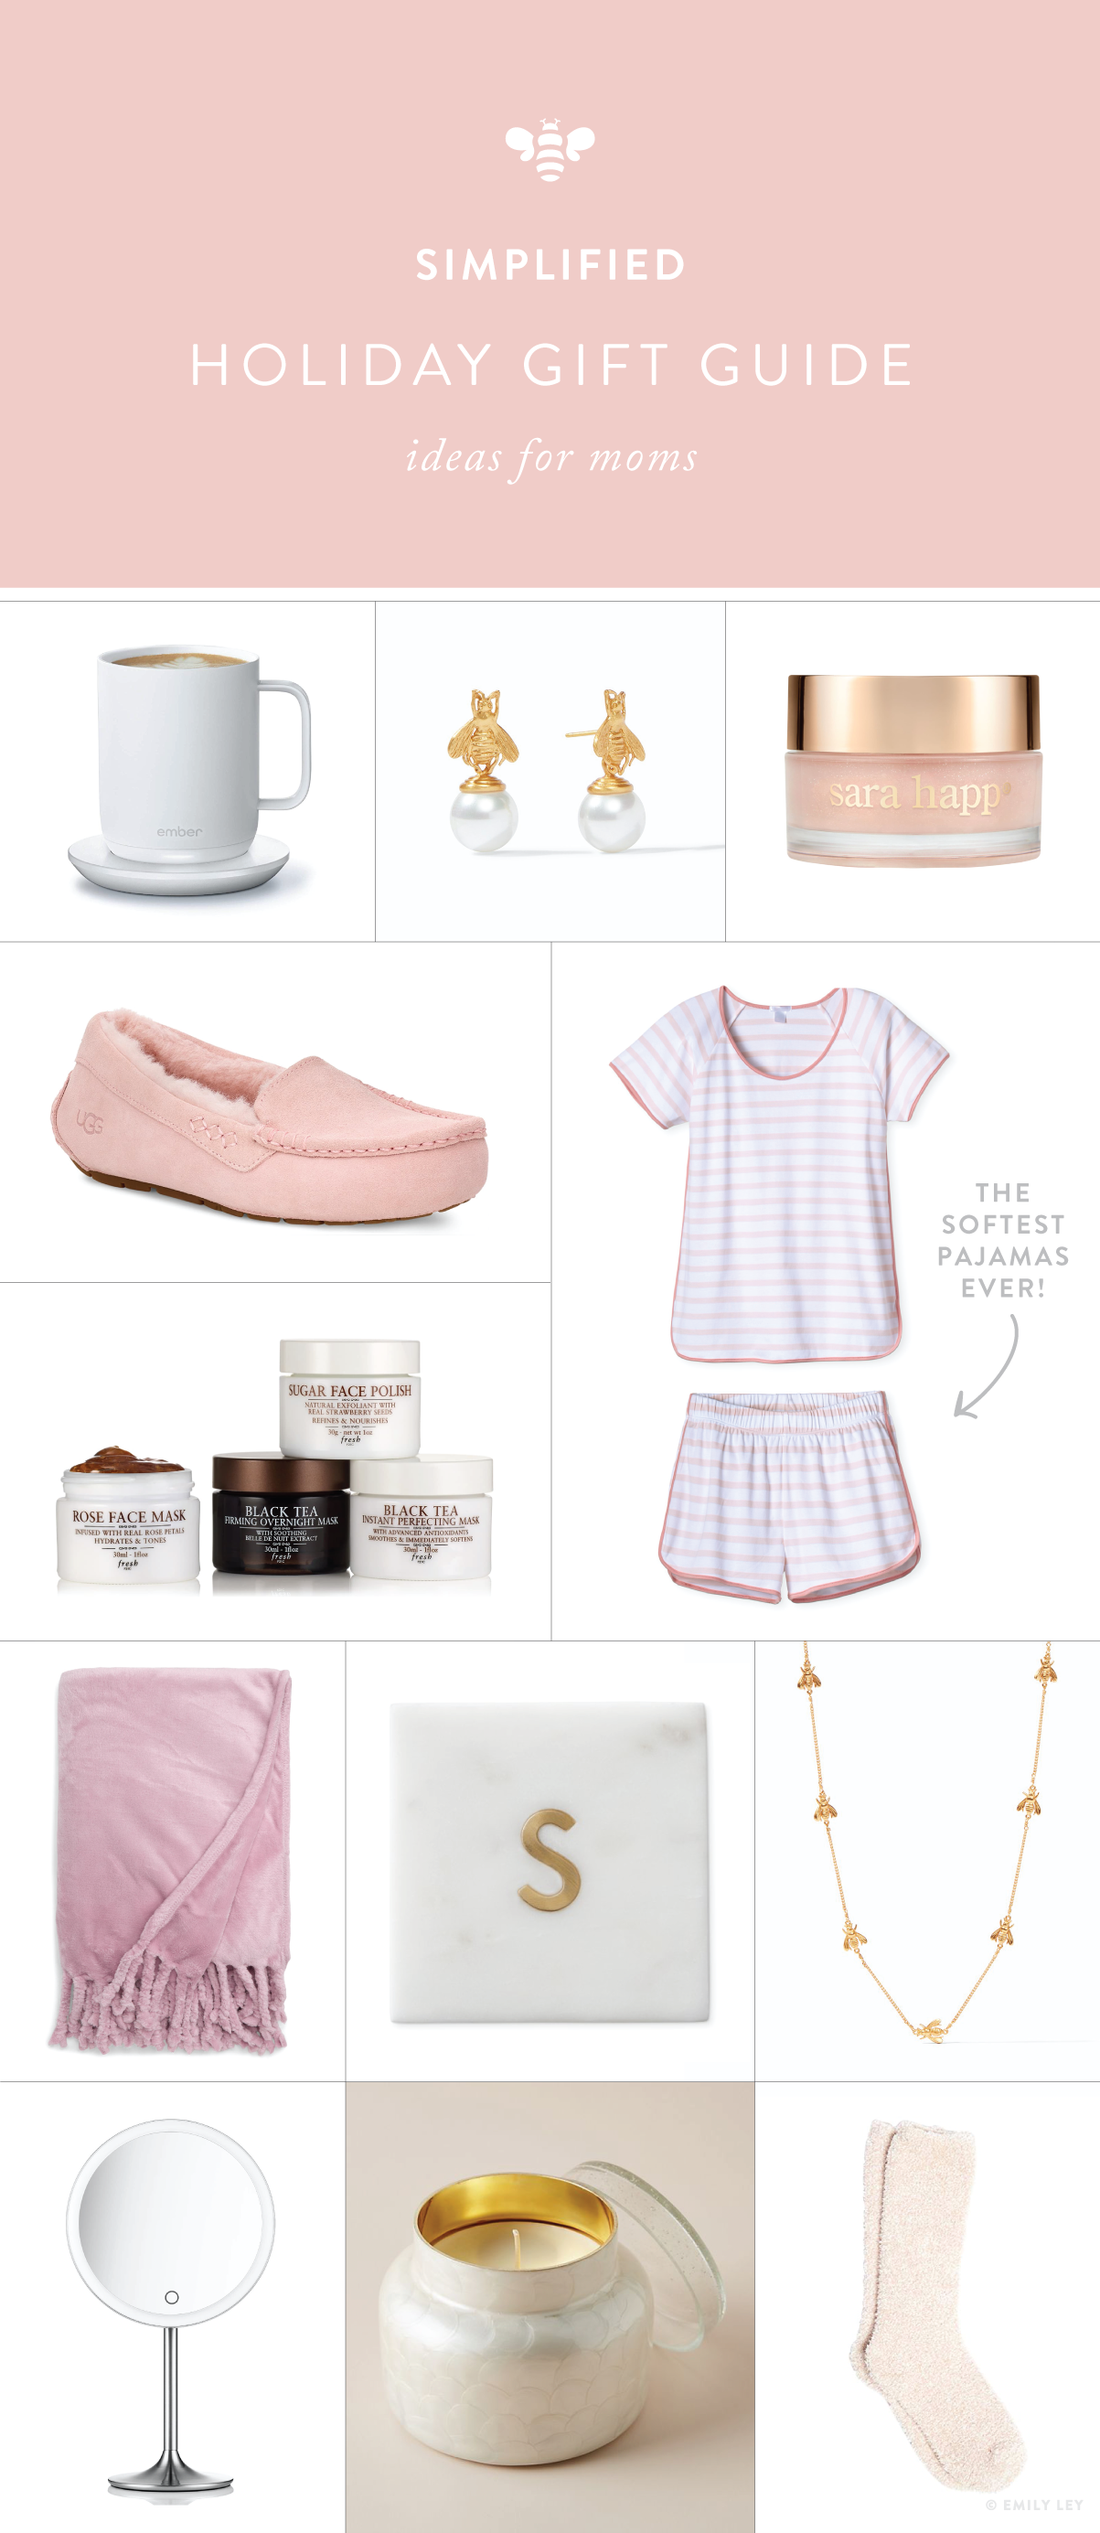 2019 Holiday Gift Guide: Ideas for Mom